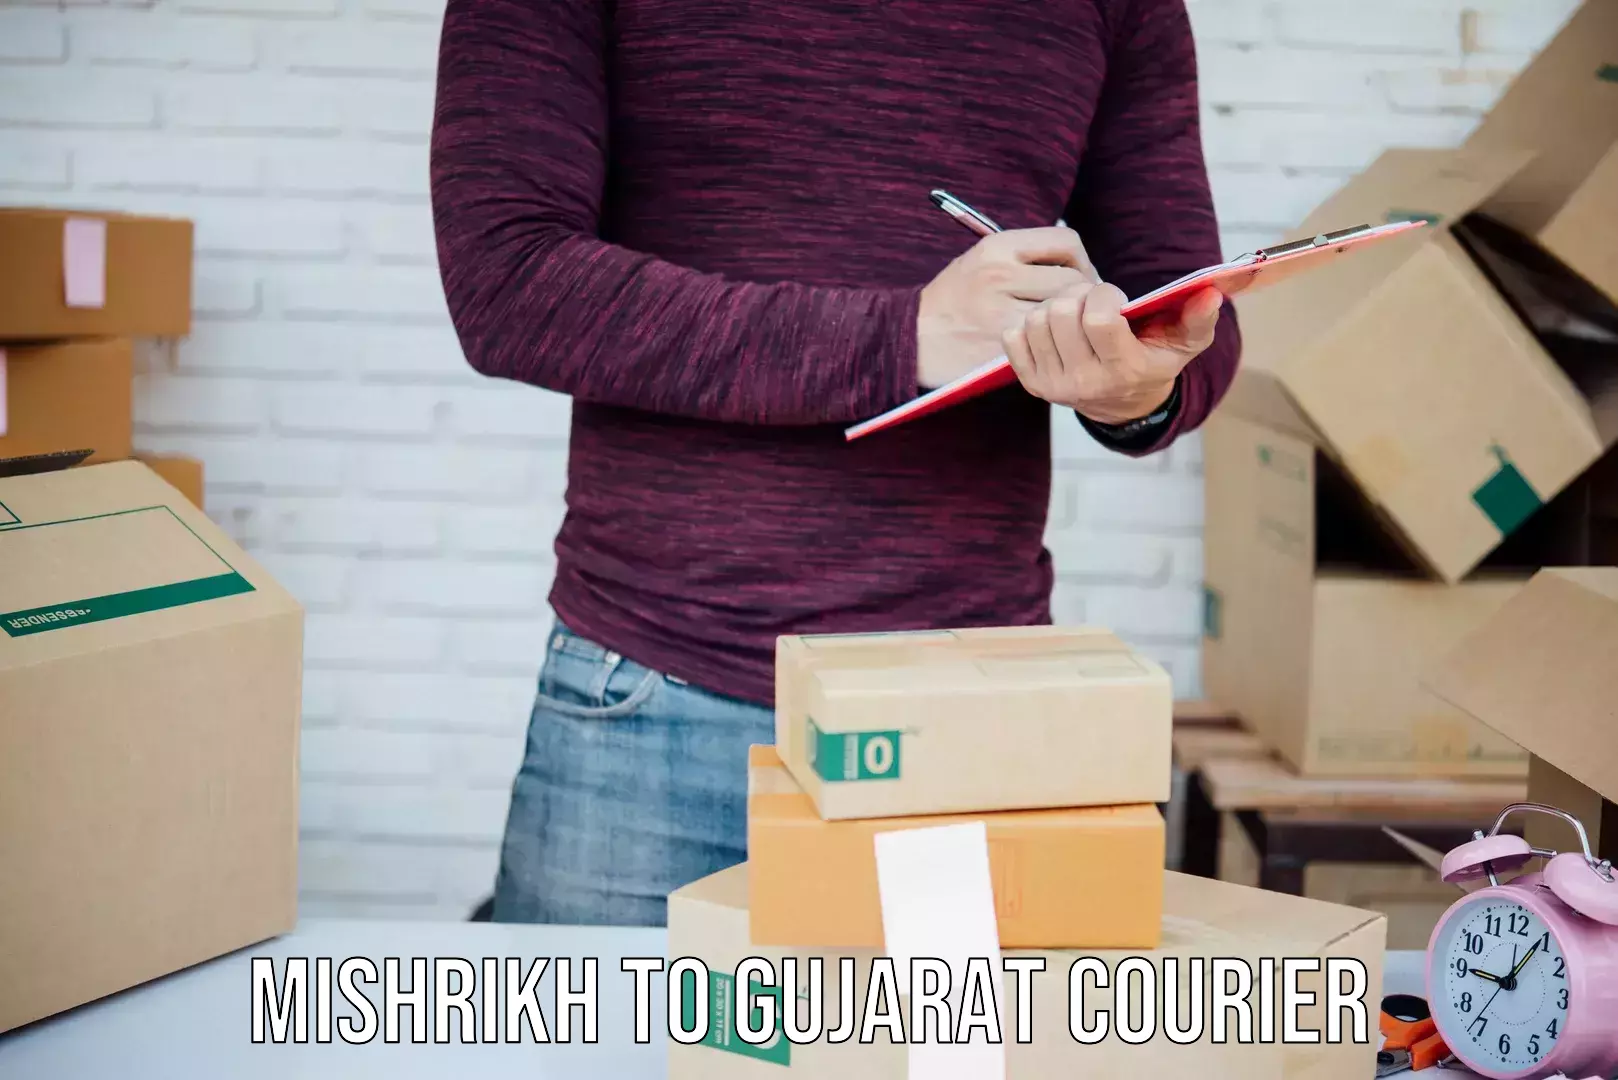 Quick courier services in Mishrikh to Gujarat